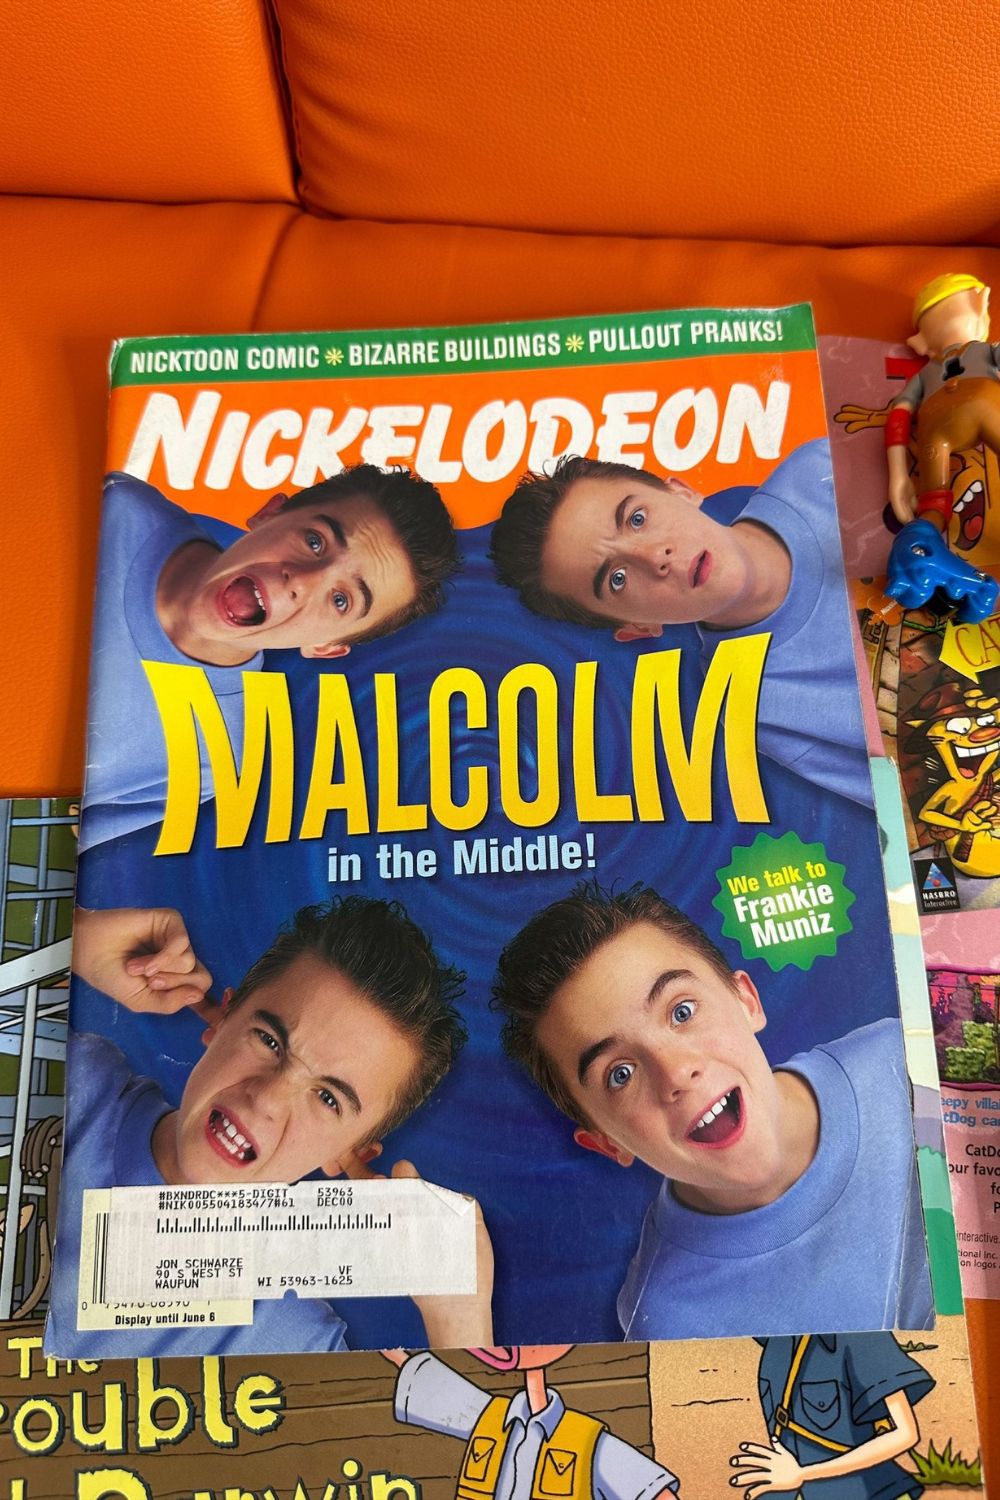 NICKELODEON MAGAZINE MAY 2000 ISSUE: "MALCOLM IN THE MIDDLE" COVER*